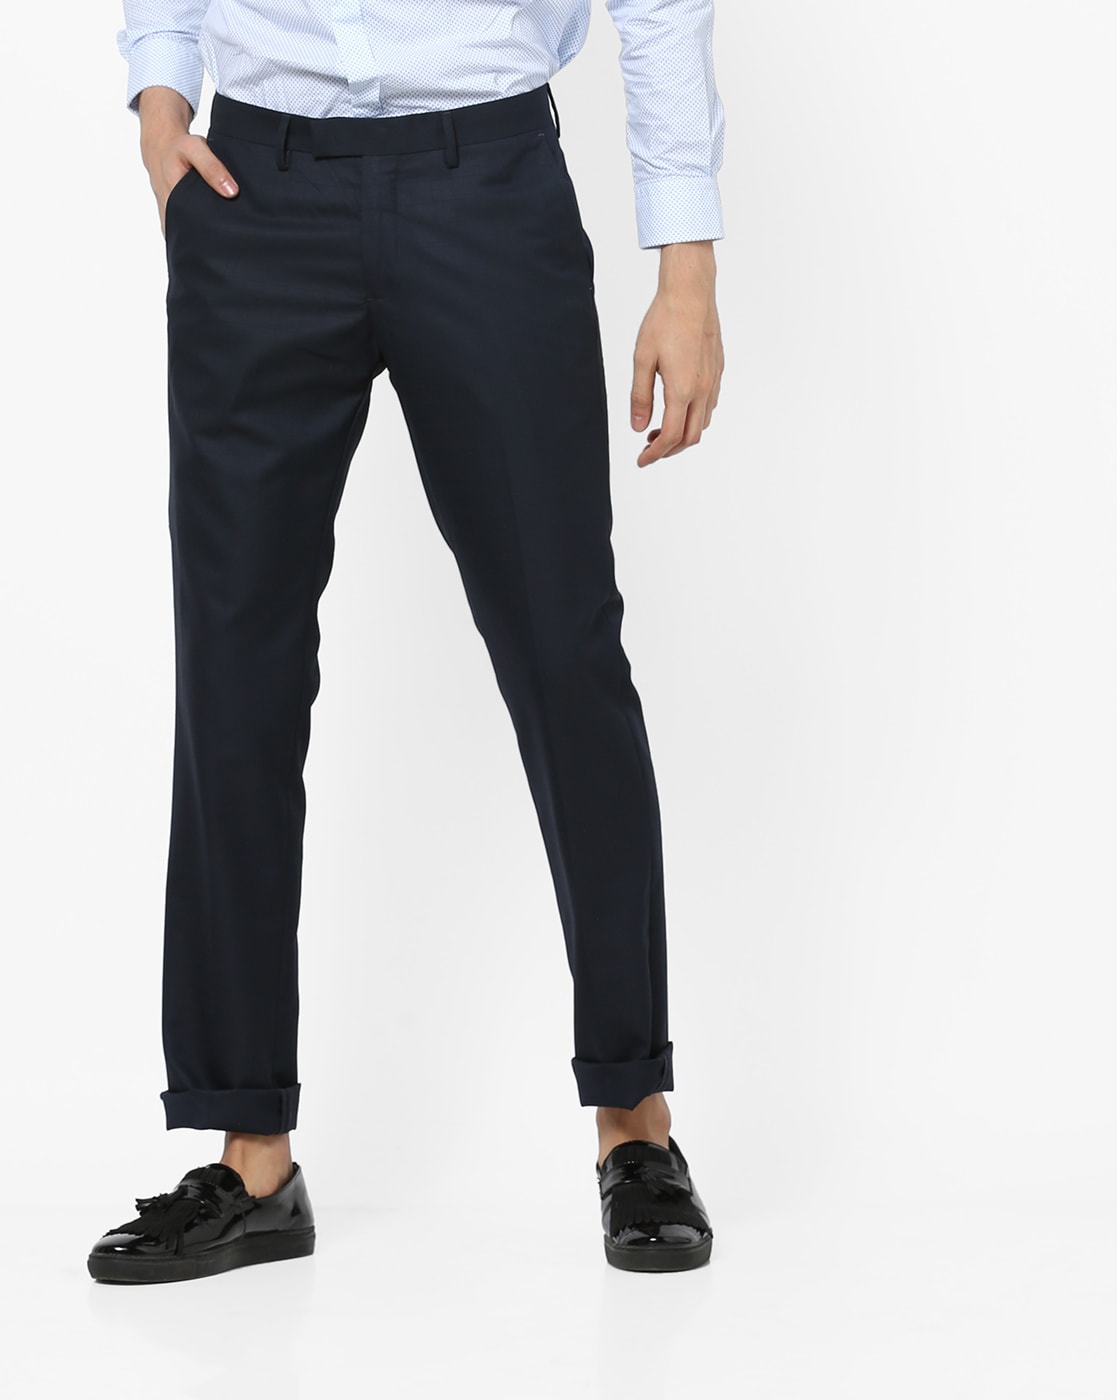 Us Polo Assn Chinos Trousers  Buy Us Polo Assn Chinos Trousers online in  India